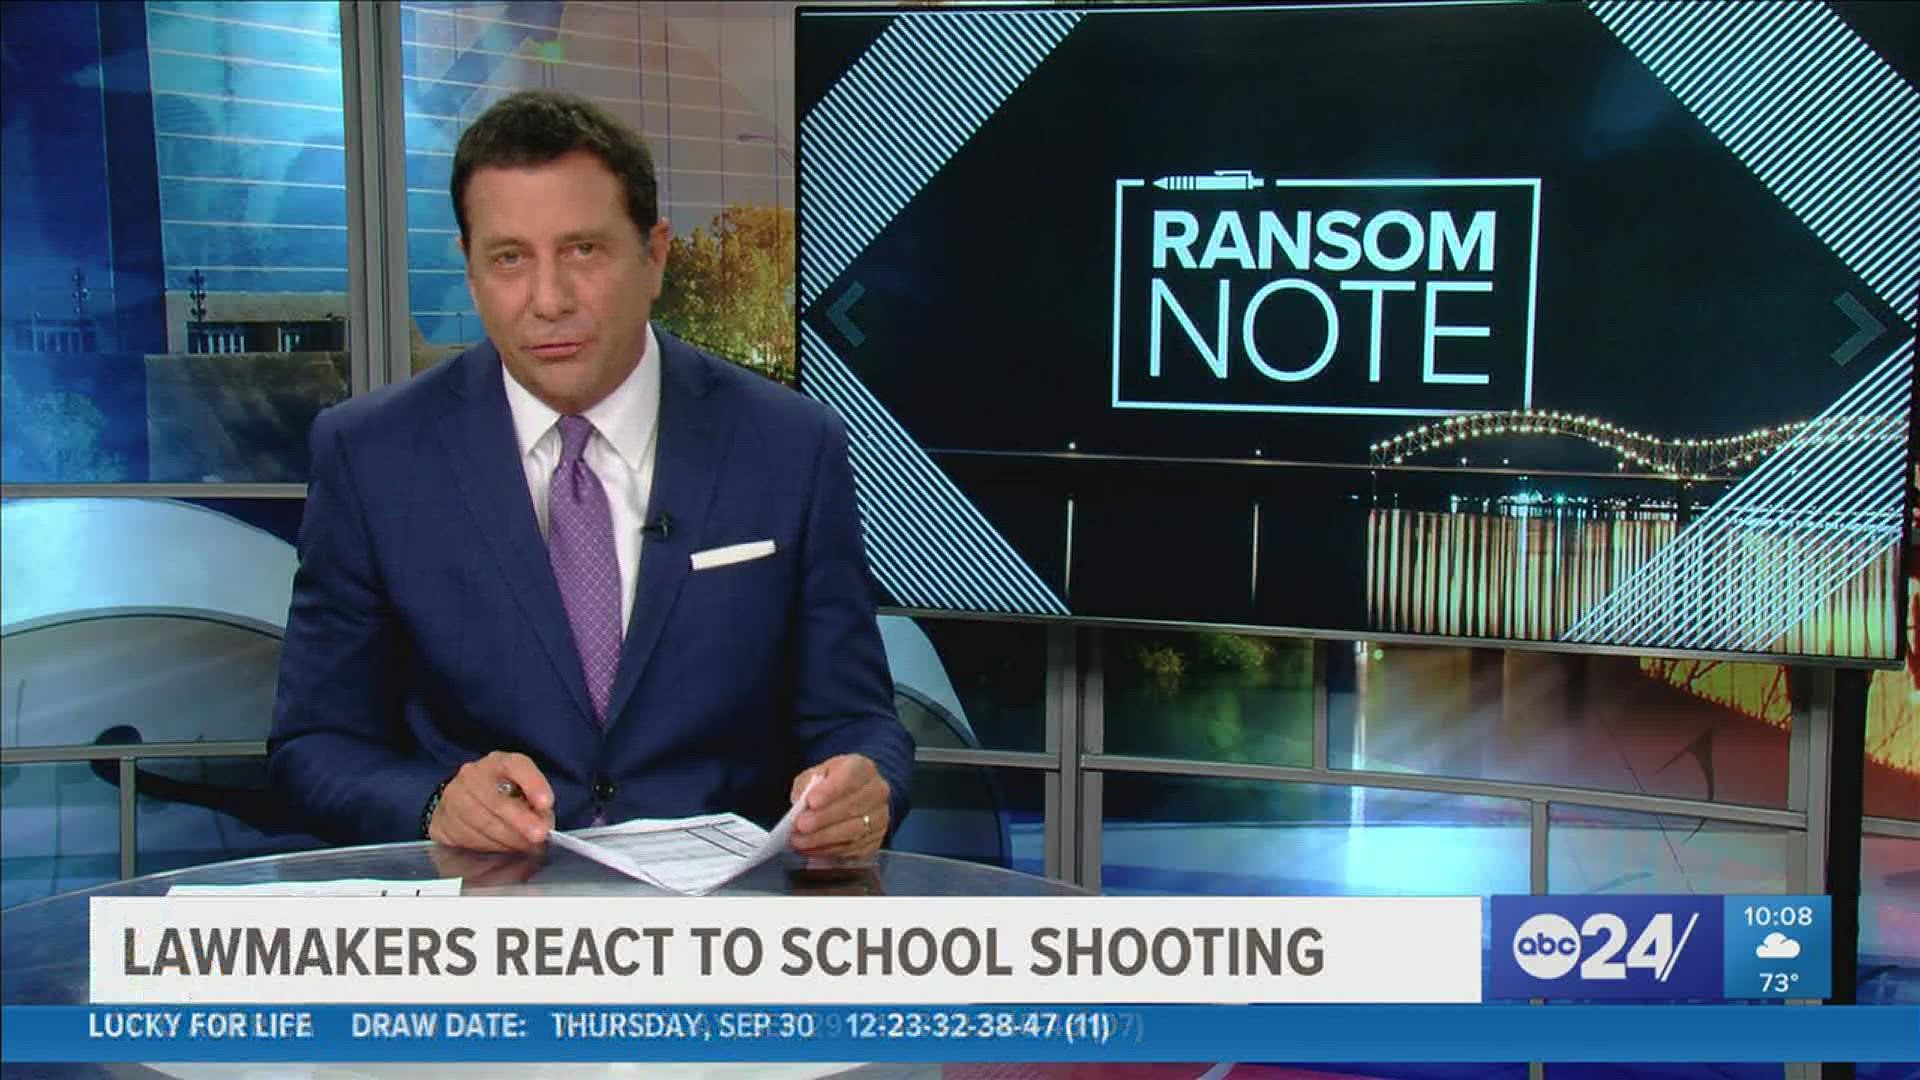 Anchor Richard Ransom addresses Thursday's school shooting and reaction to it in his Ransom Note.